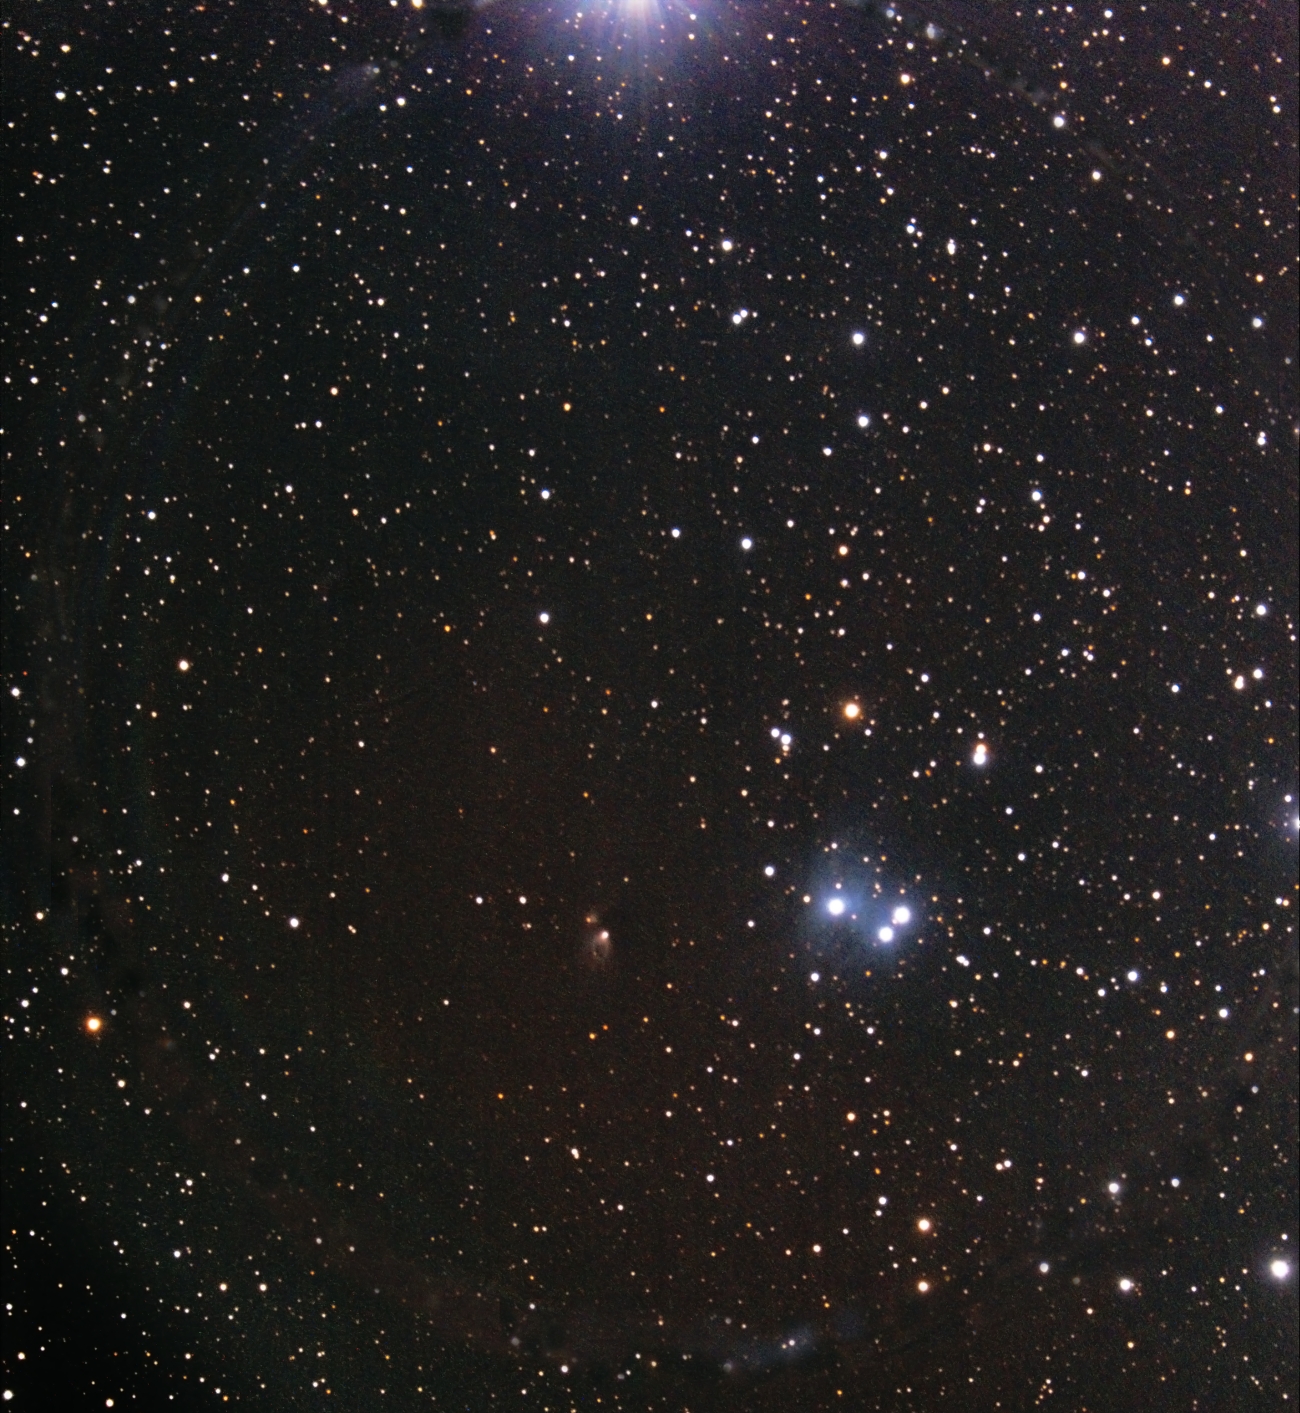 reflexion nebula Vdb 1 from September 7th, 2016; 5x10min; C9.25 at 1525mm; mod. Canon 1100d, uv_ir filter; reflexion of the bright star was masked;